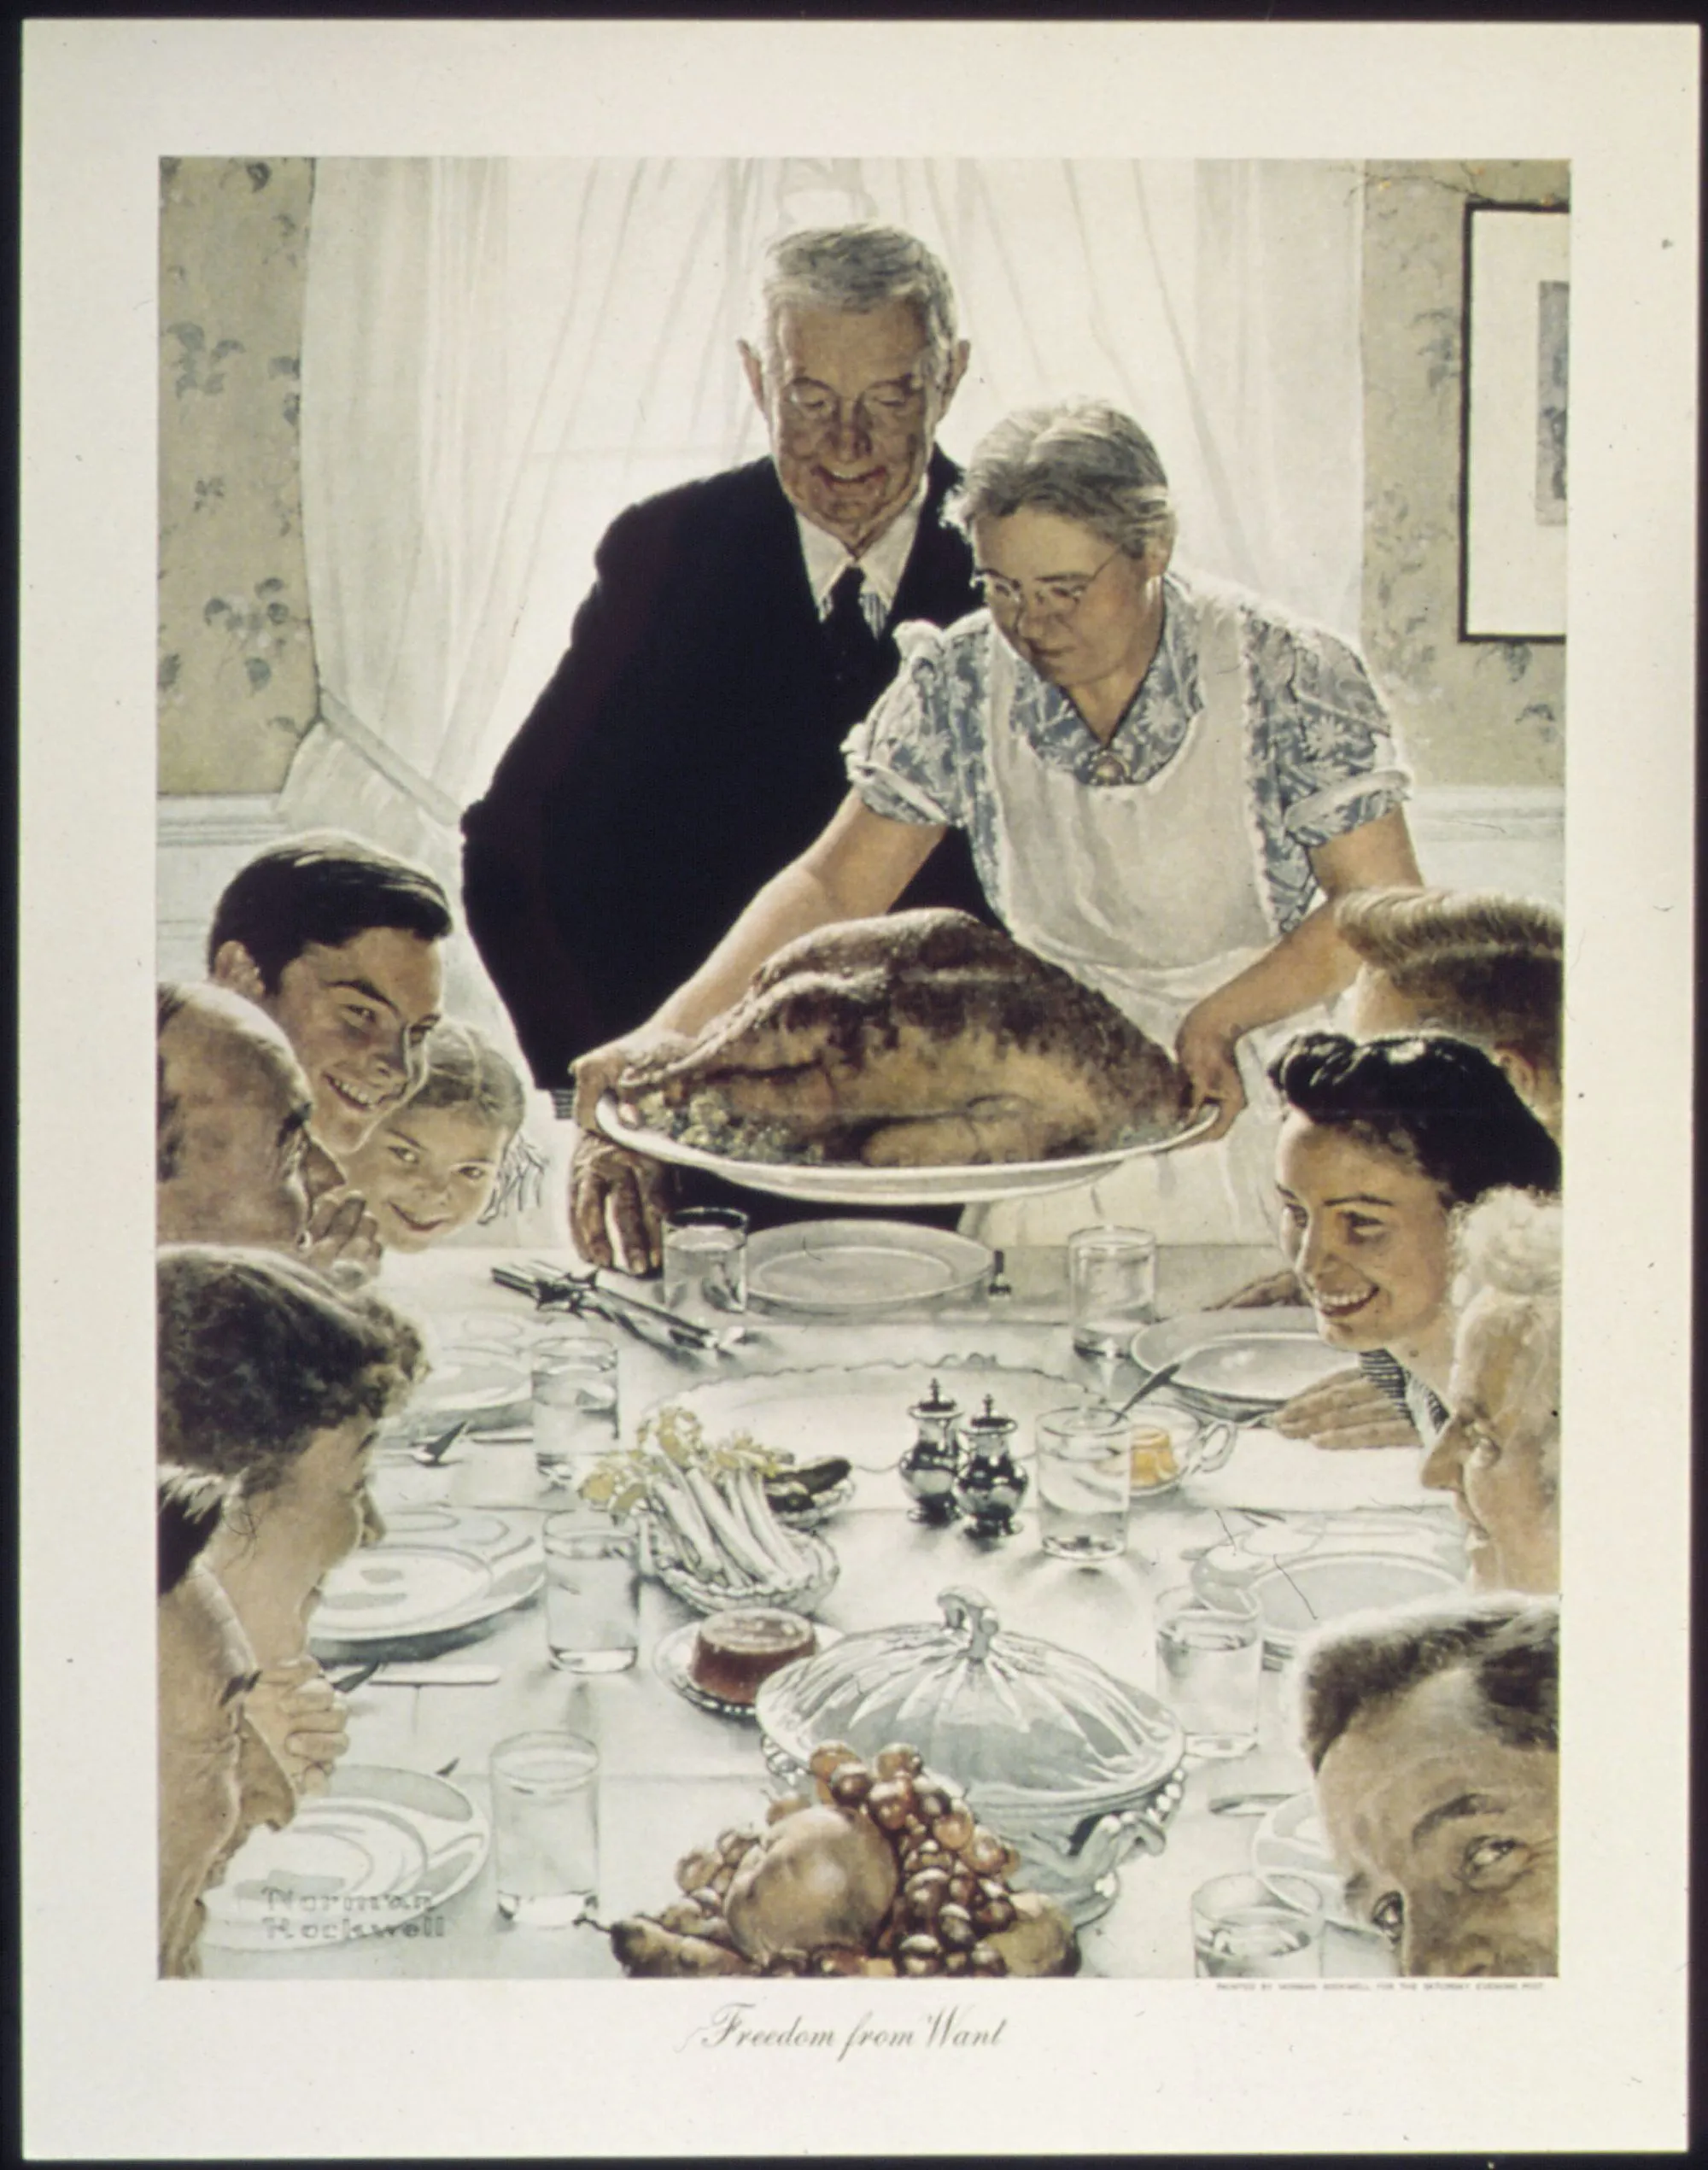 Freedom from want, Norman Rockwell, 1942.